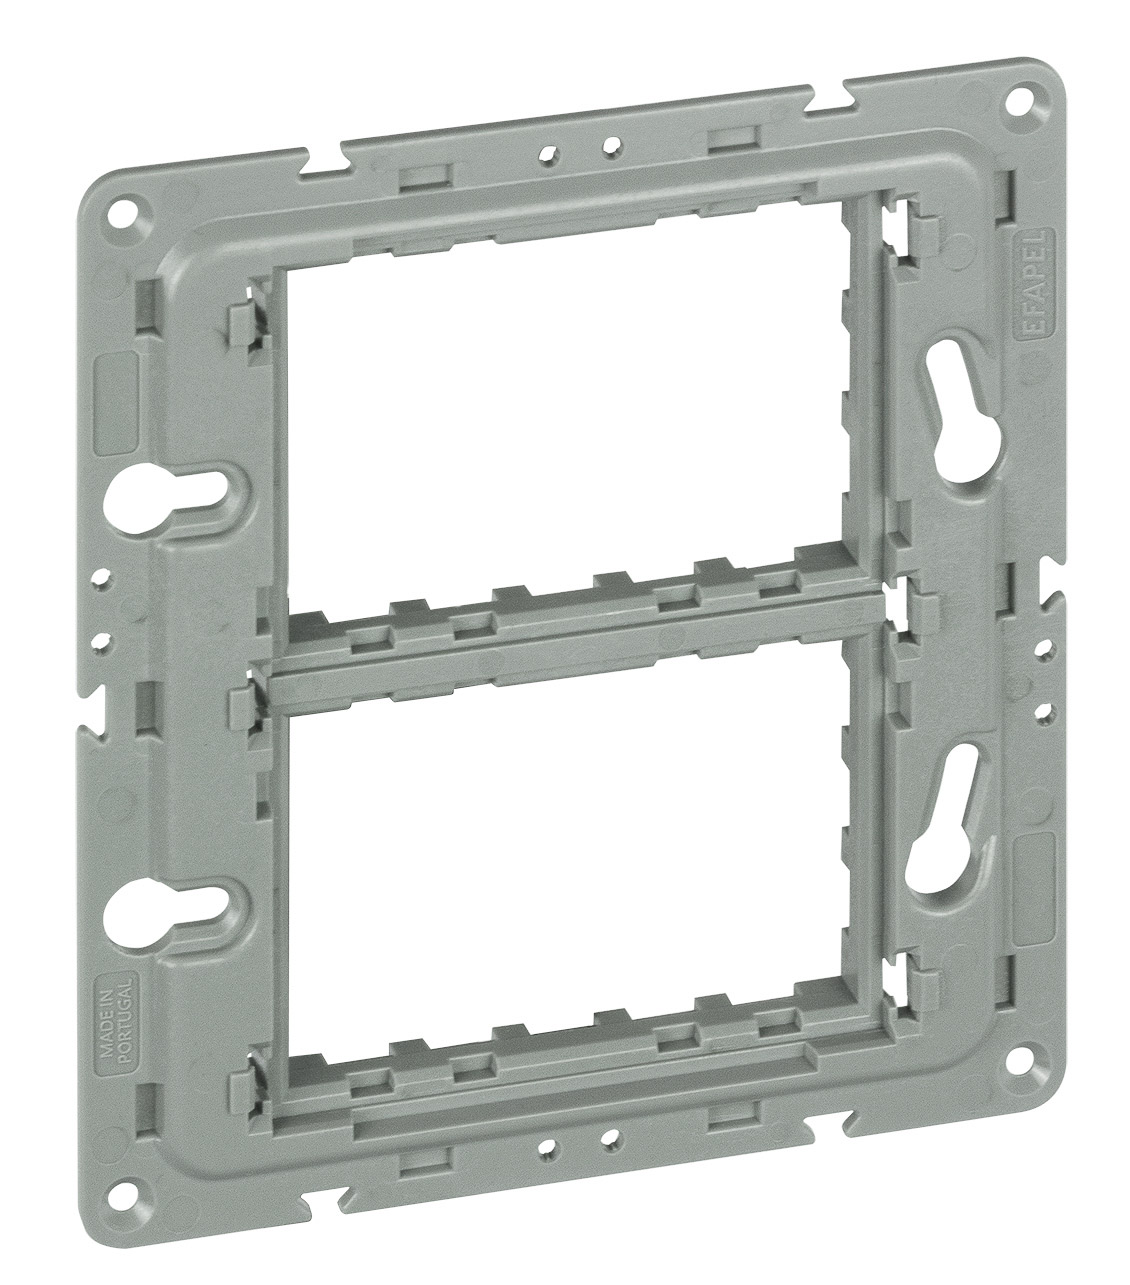 Support Frame up to 3+3 Modules